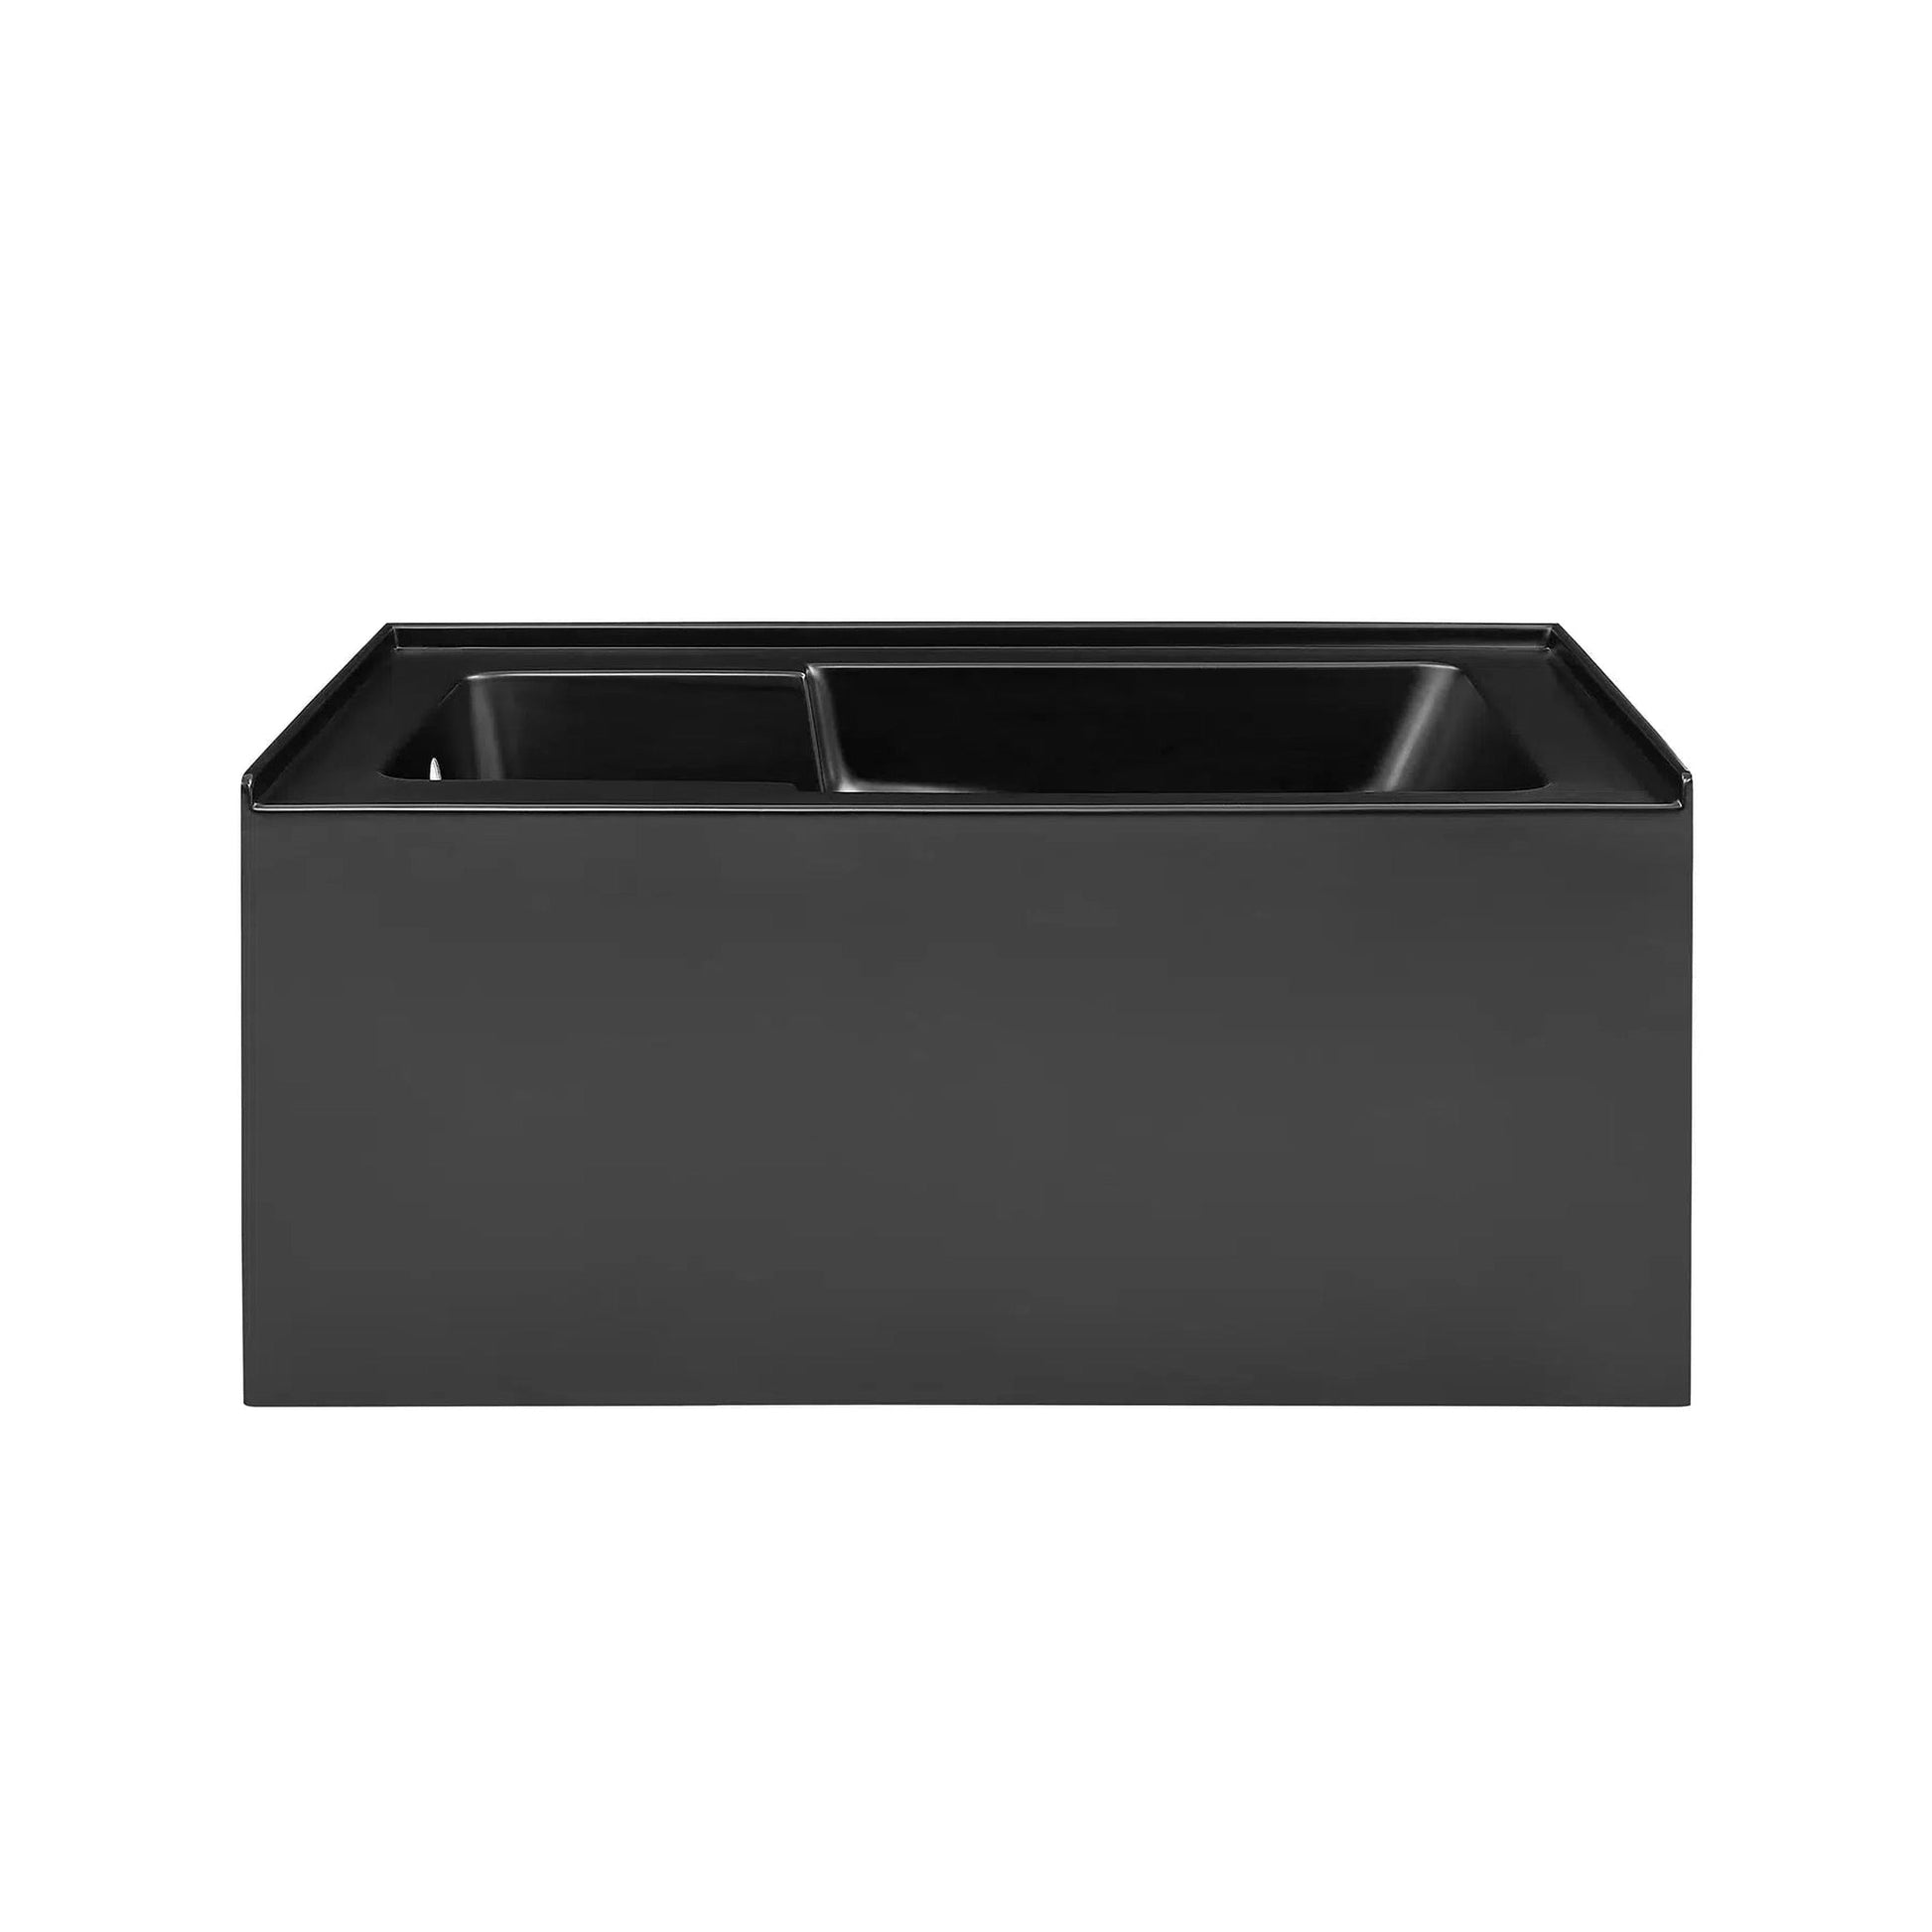 Swiss Madison Voltaire 54" x 30" Matte Black Left-Hand Drain Alcove Bathtub With Integrated Armrest and Built-In Flange & Apron Front